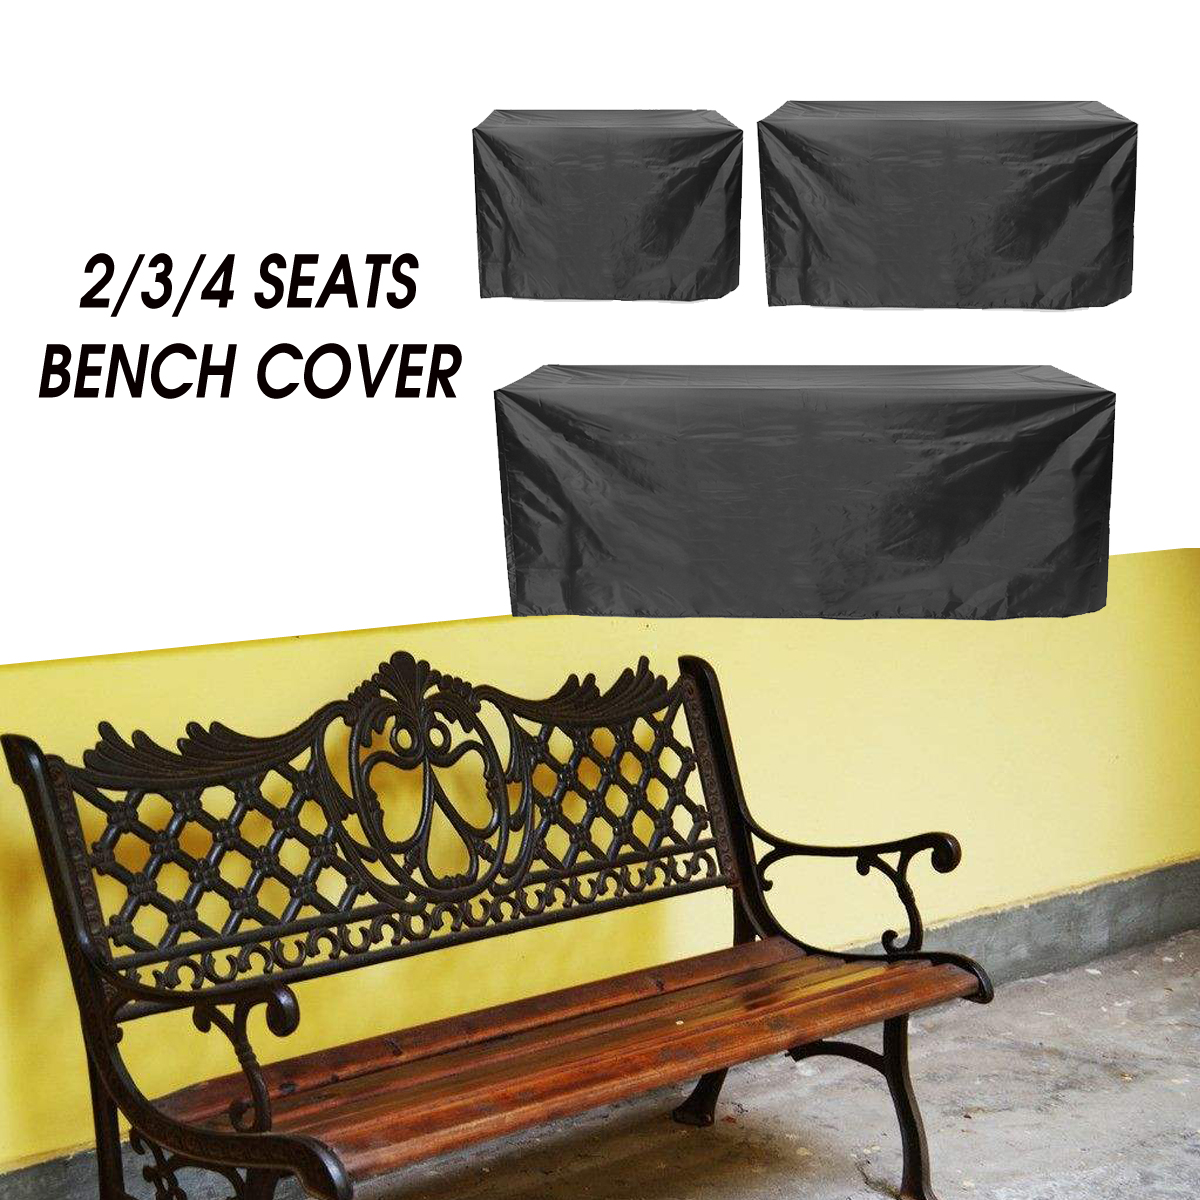 Waterproof-Furniture-Sofa-Bench-Table-Chair-Covers-234-Seaters-Garden-Outdoor-Patio-furniture-Cover-1446119-2